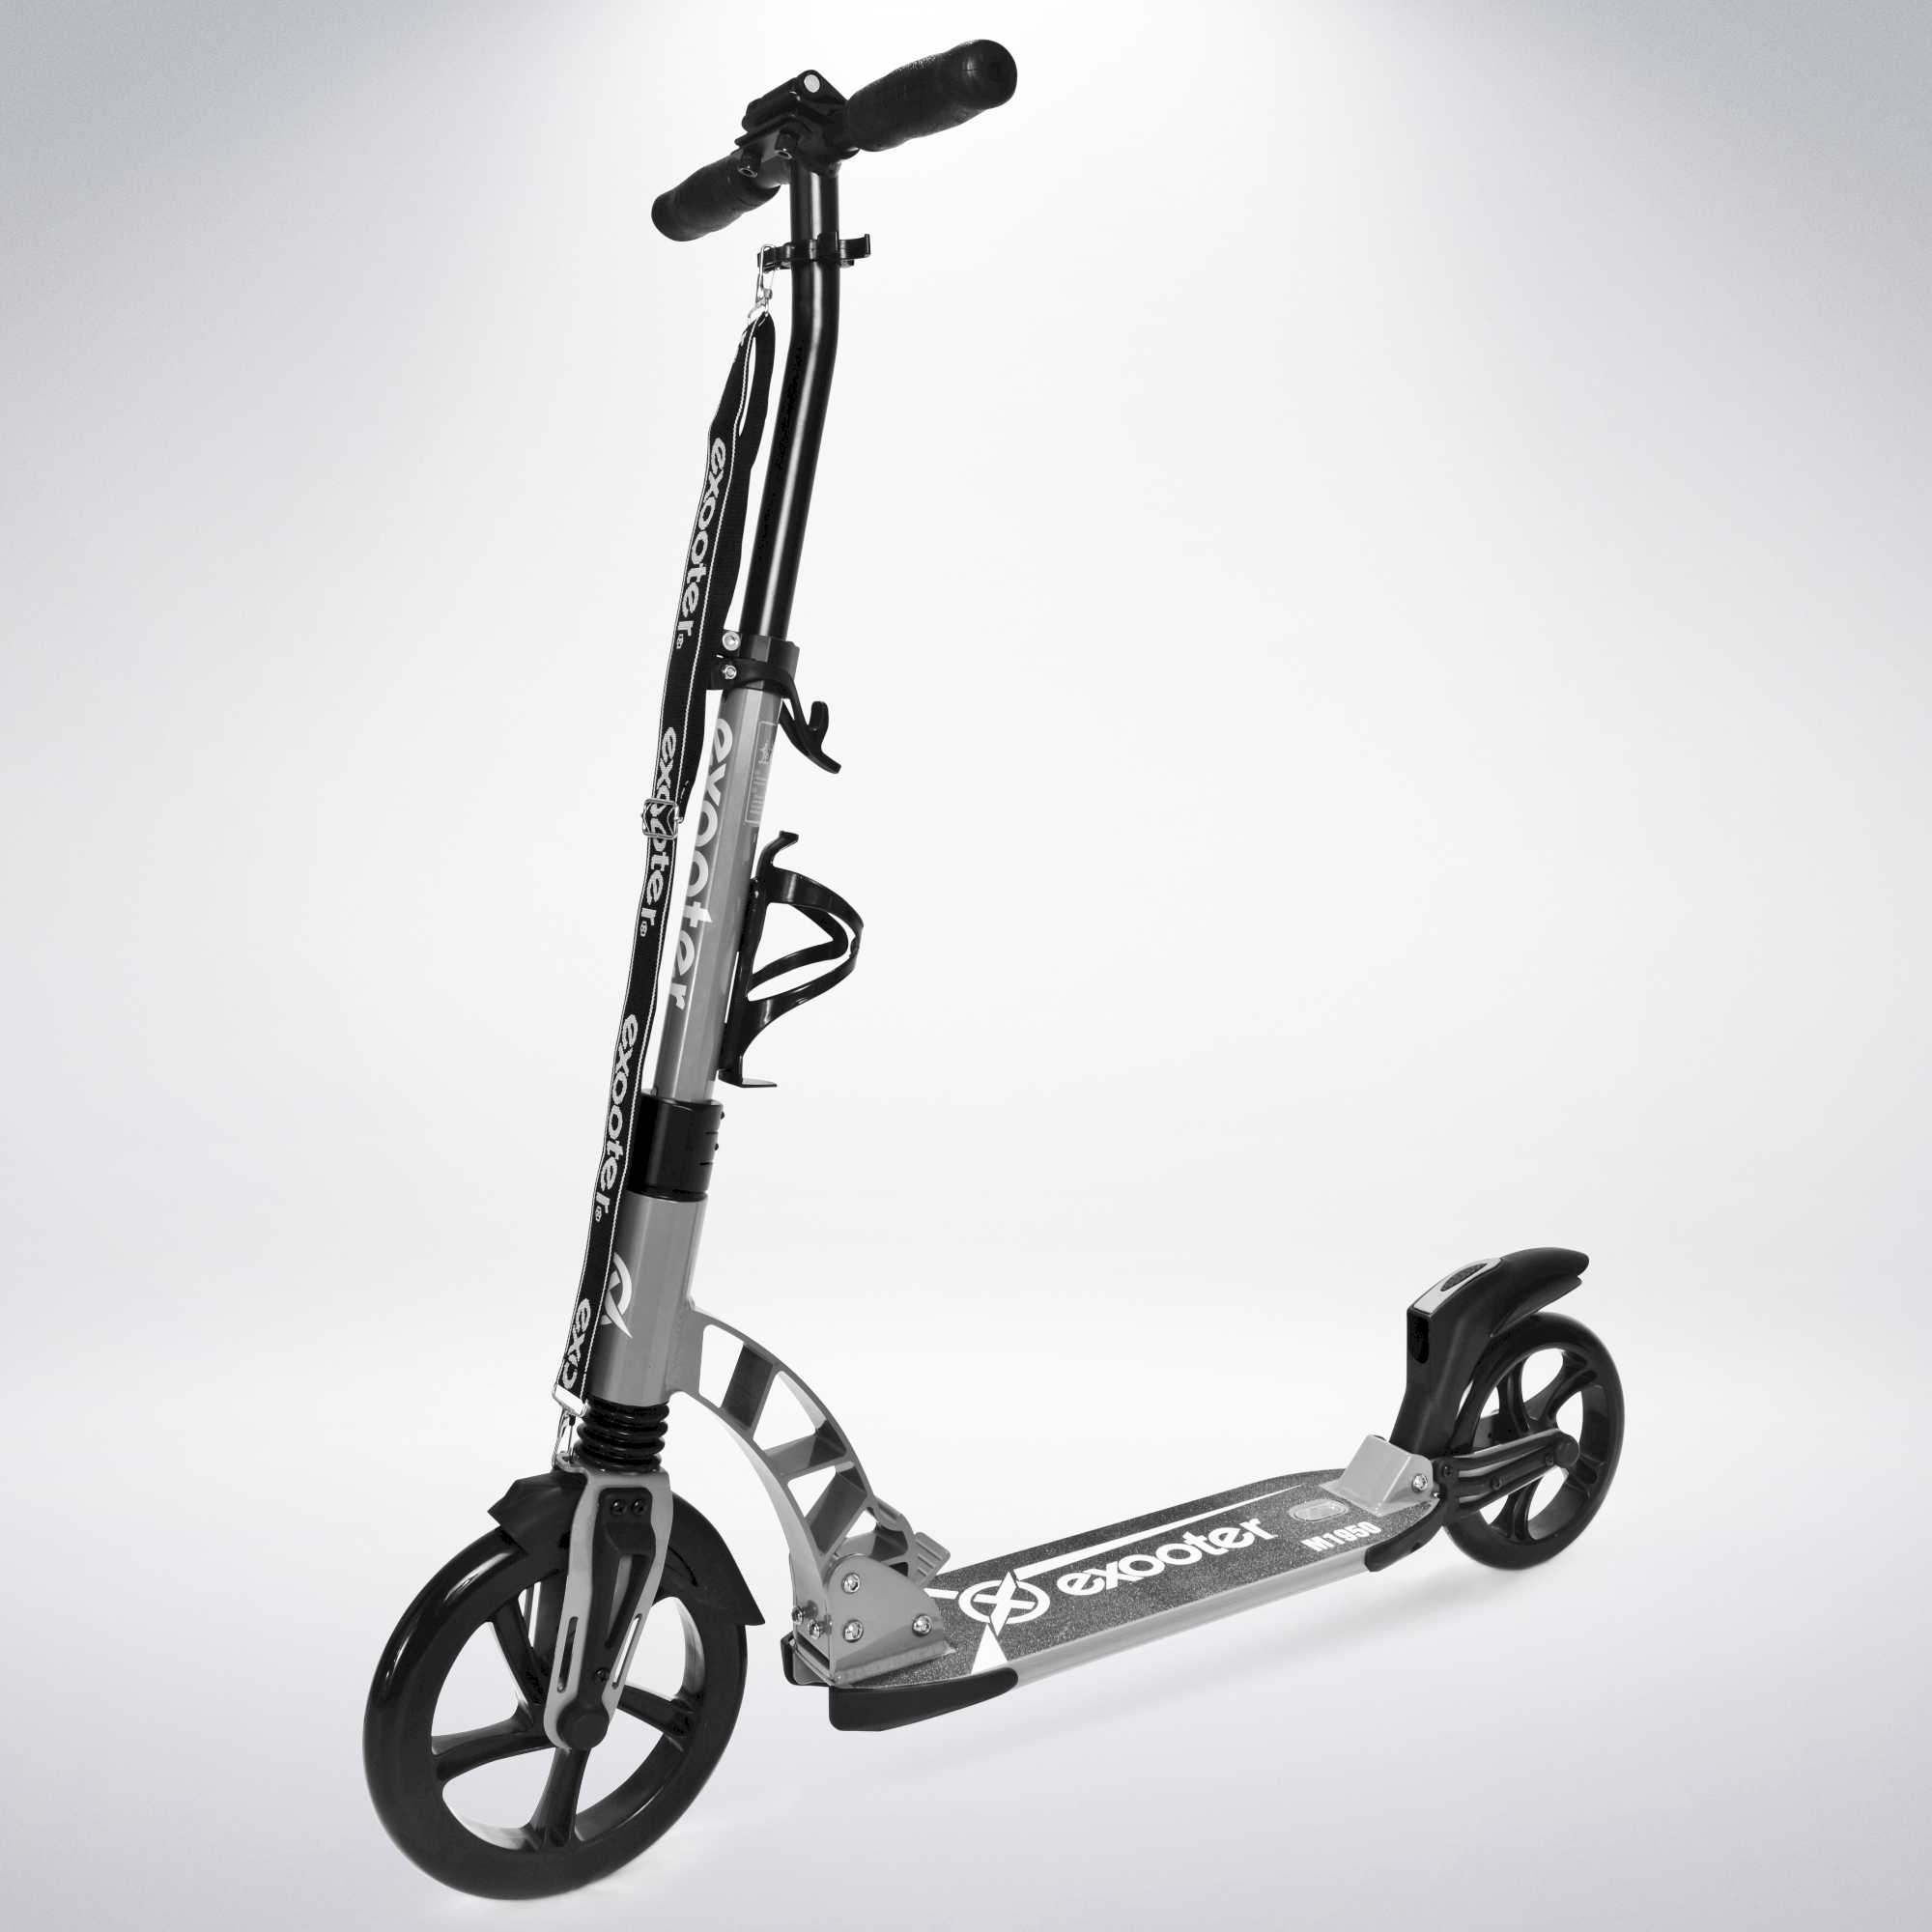 EXOOTER M2050GR Manual Adult Kick Scooter With Dual Shocks In